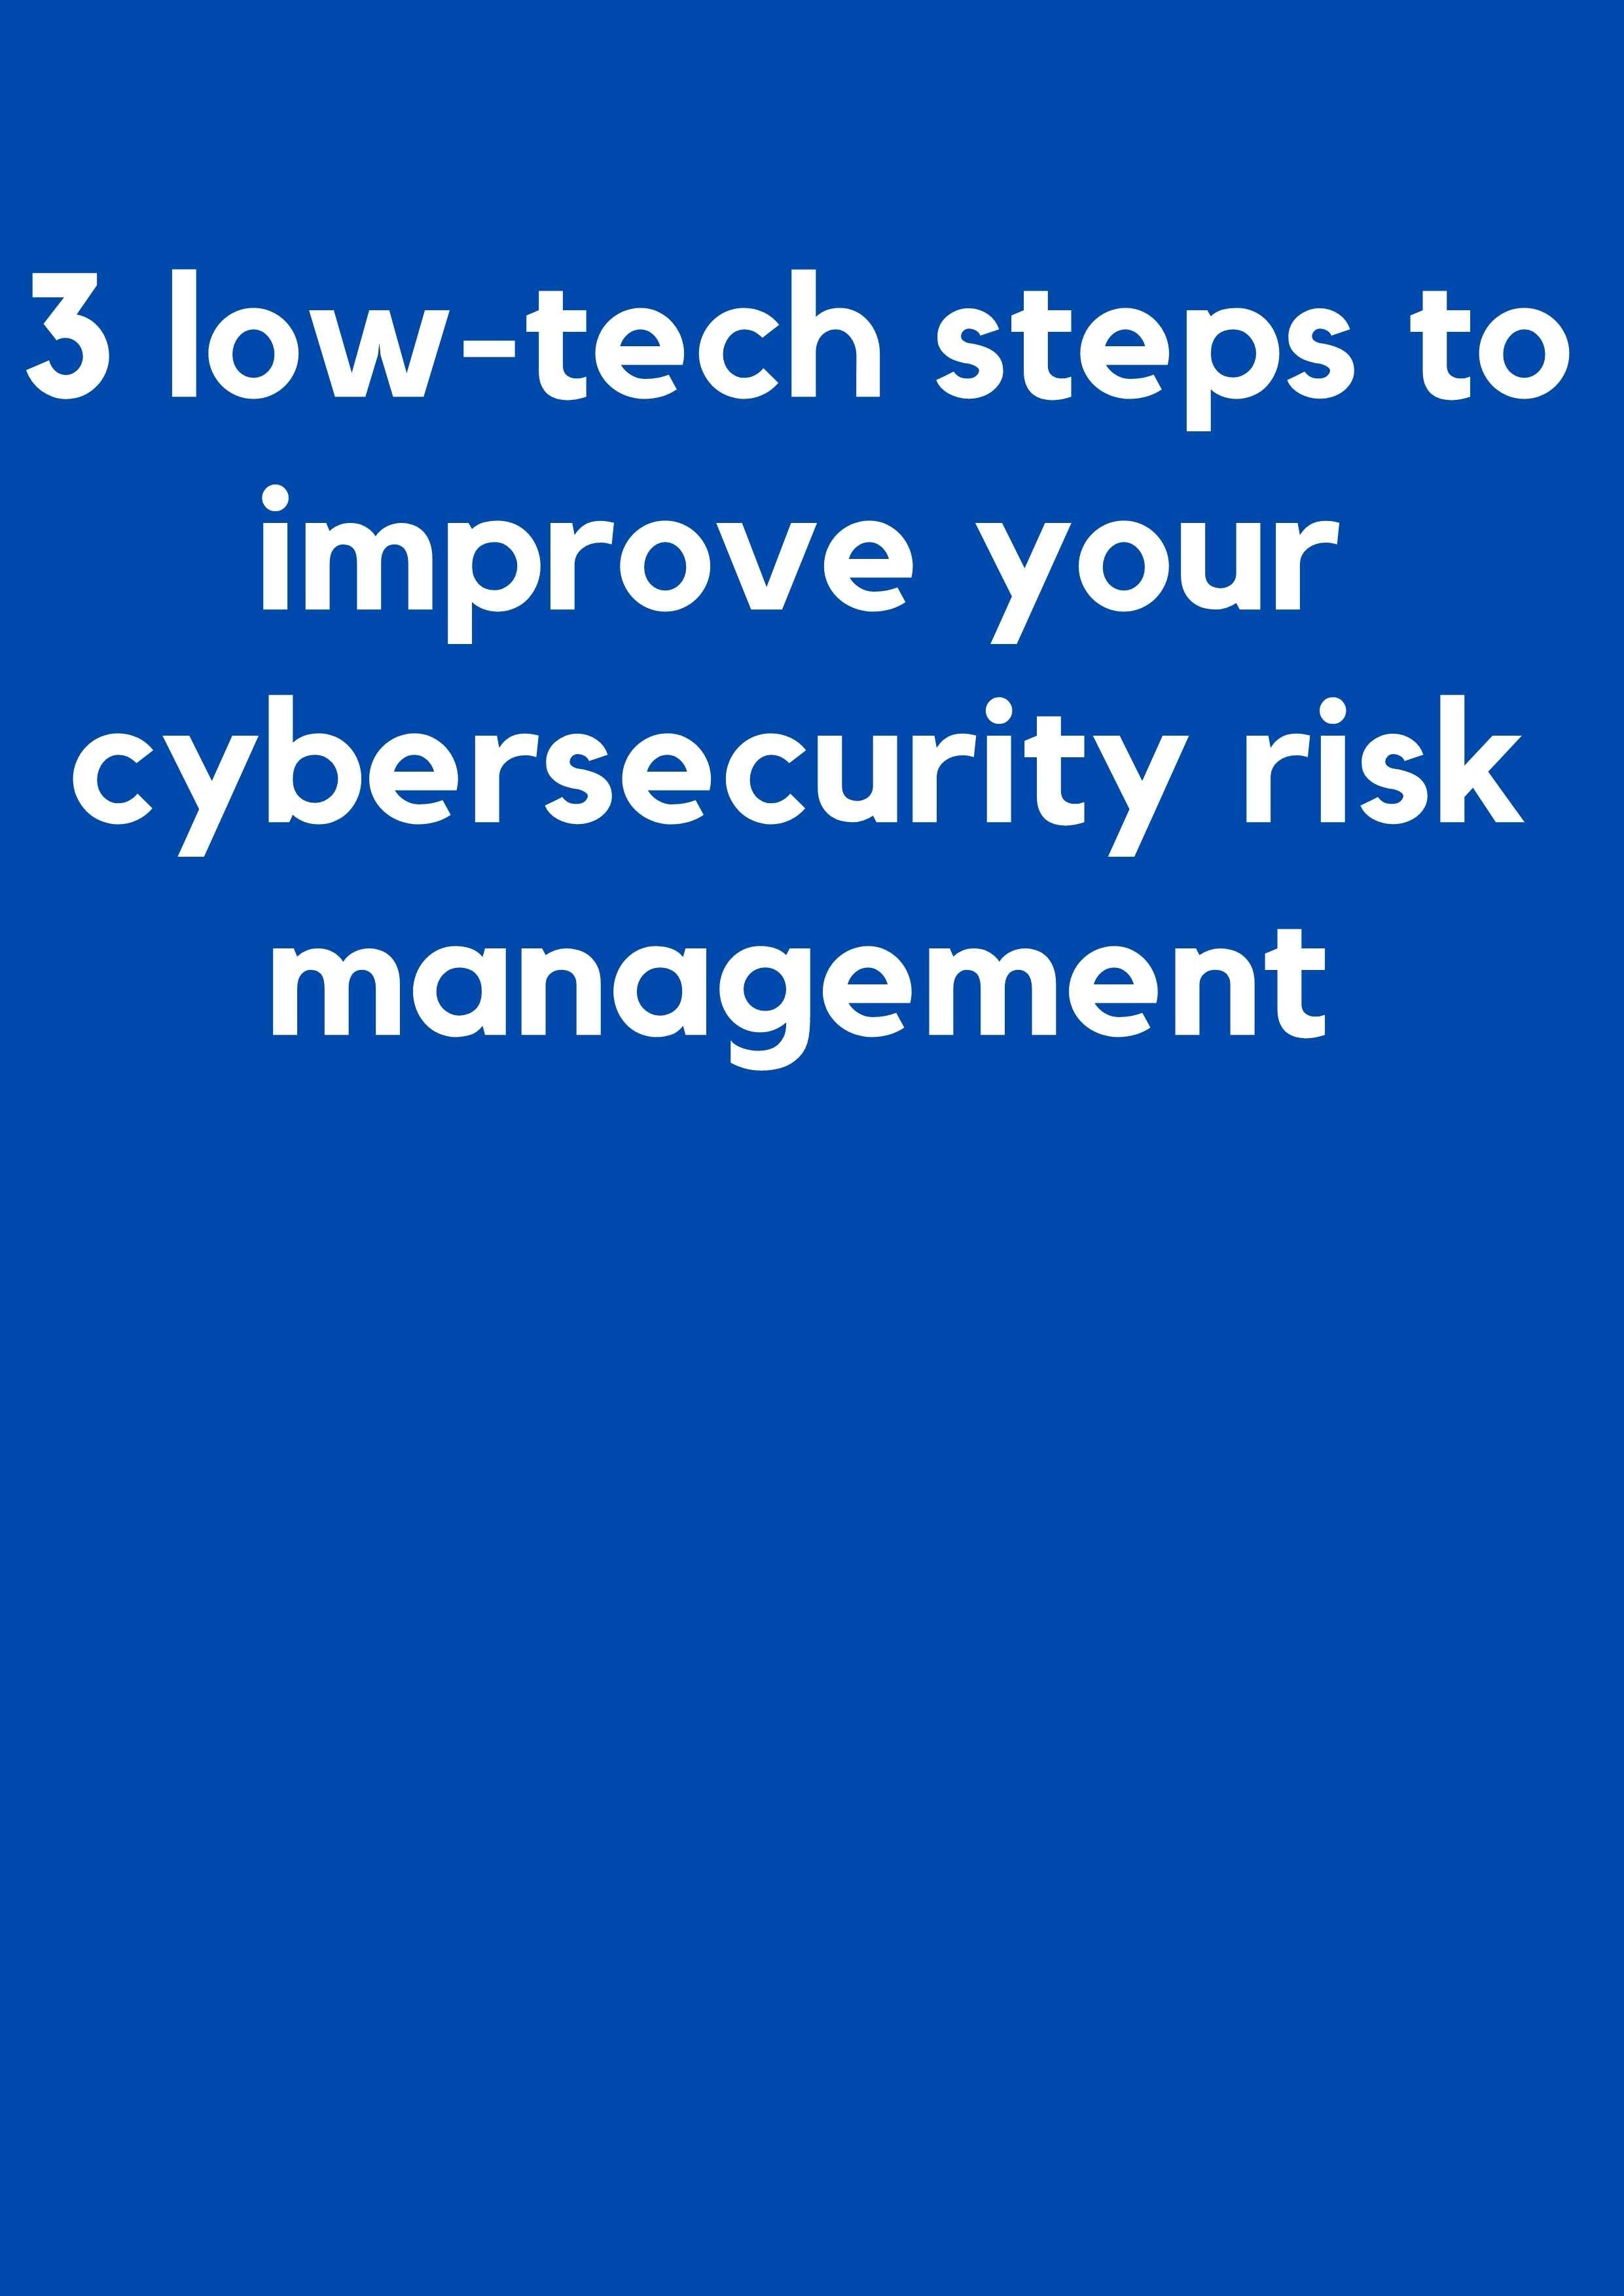 3 lowtech steps to improve your cybersecurity risk management BCyber